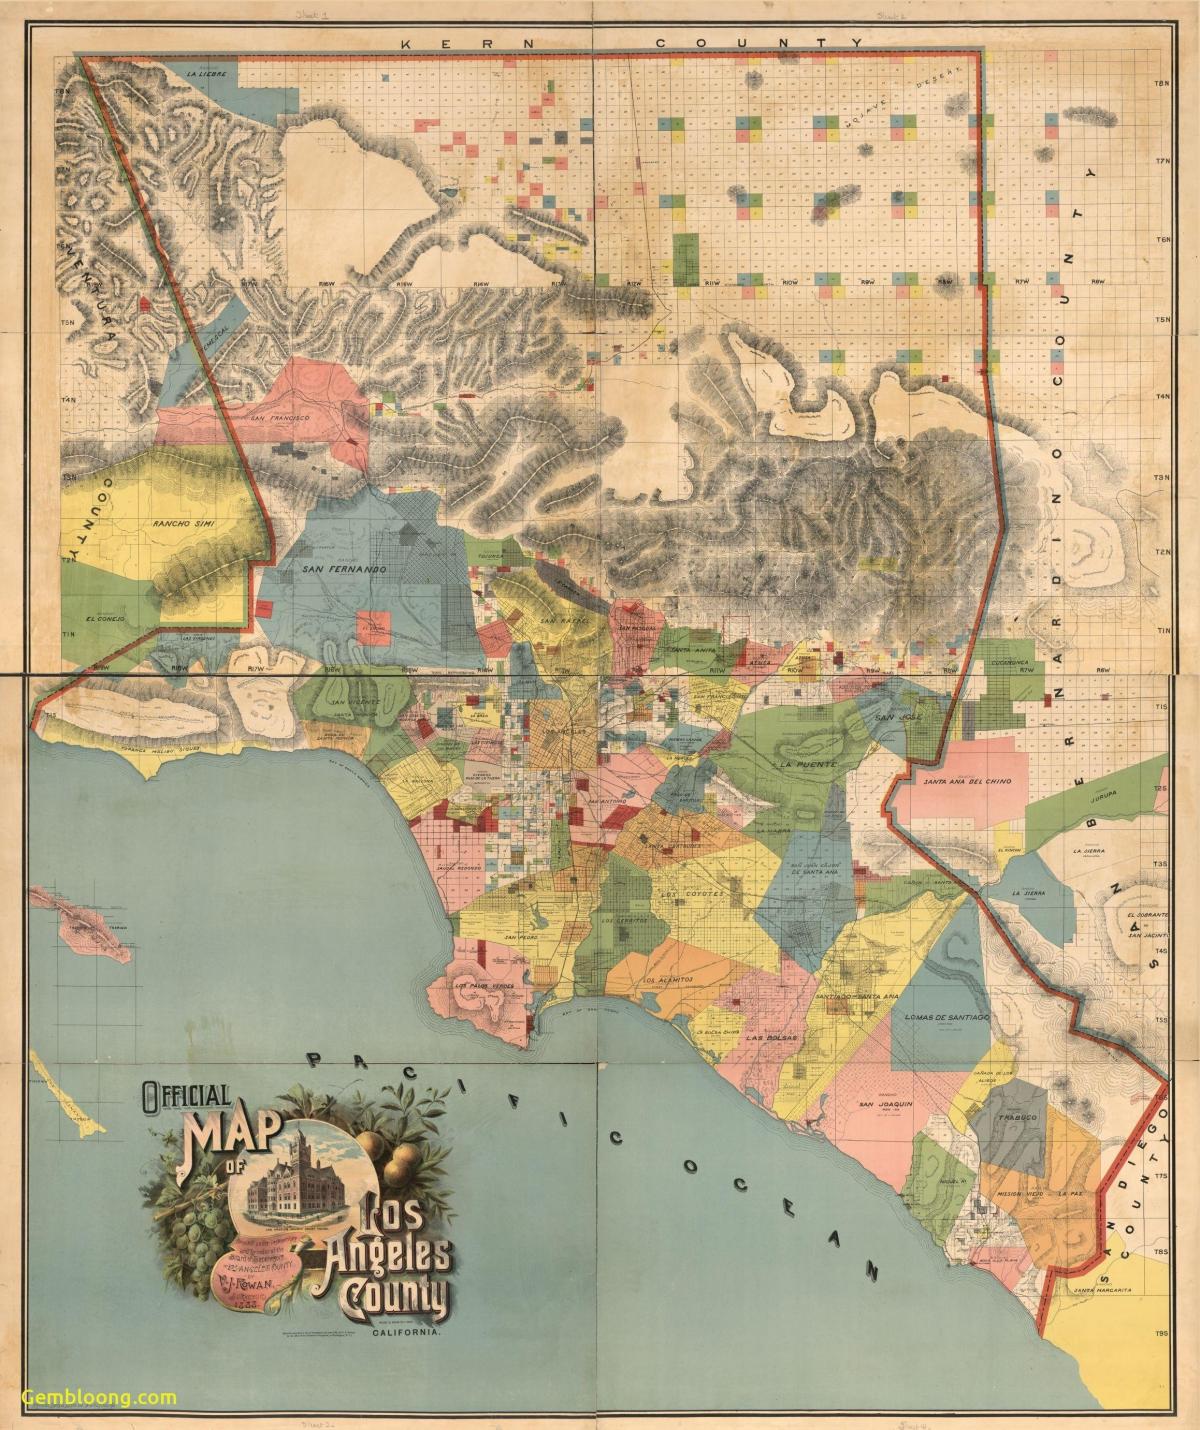 Los Angeles historical map